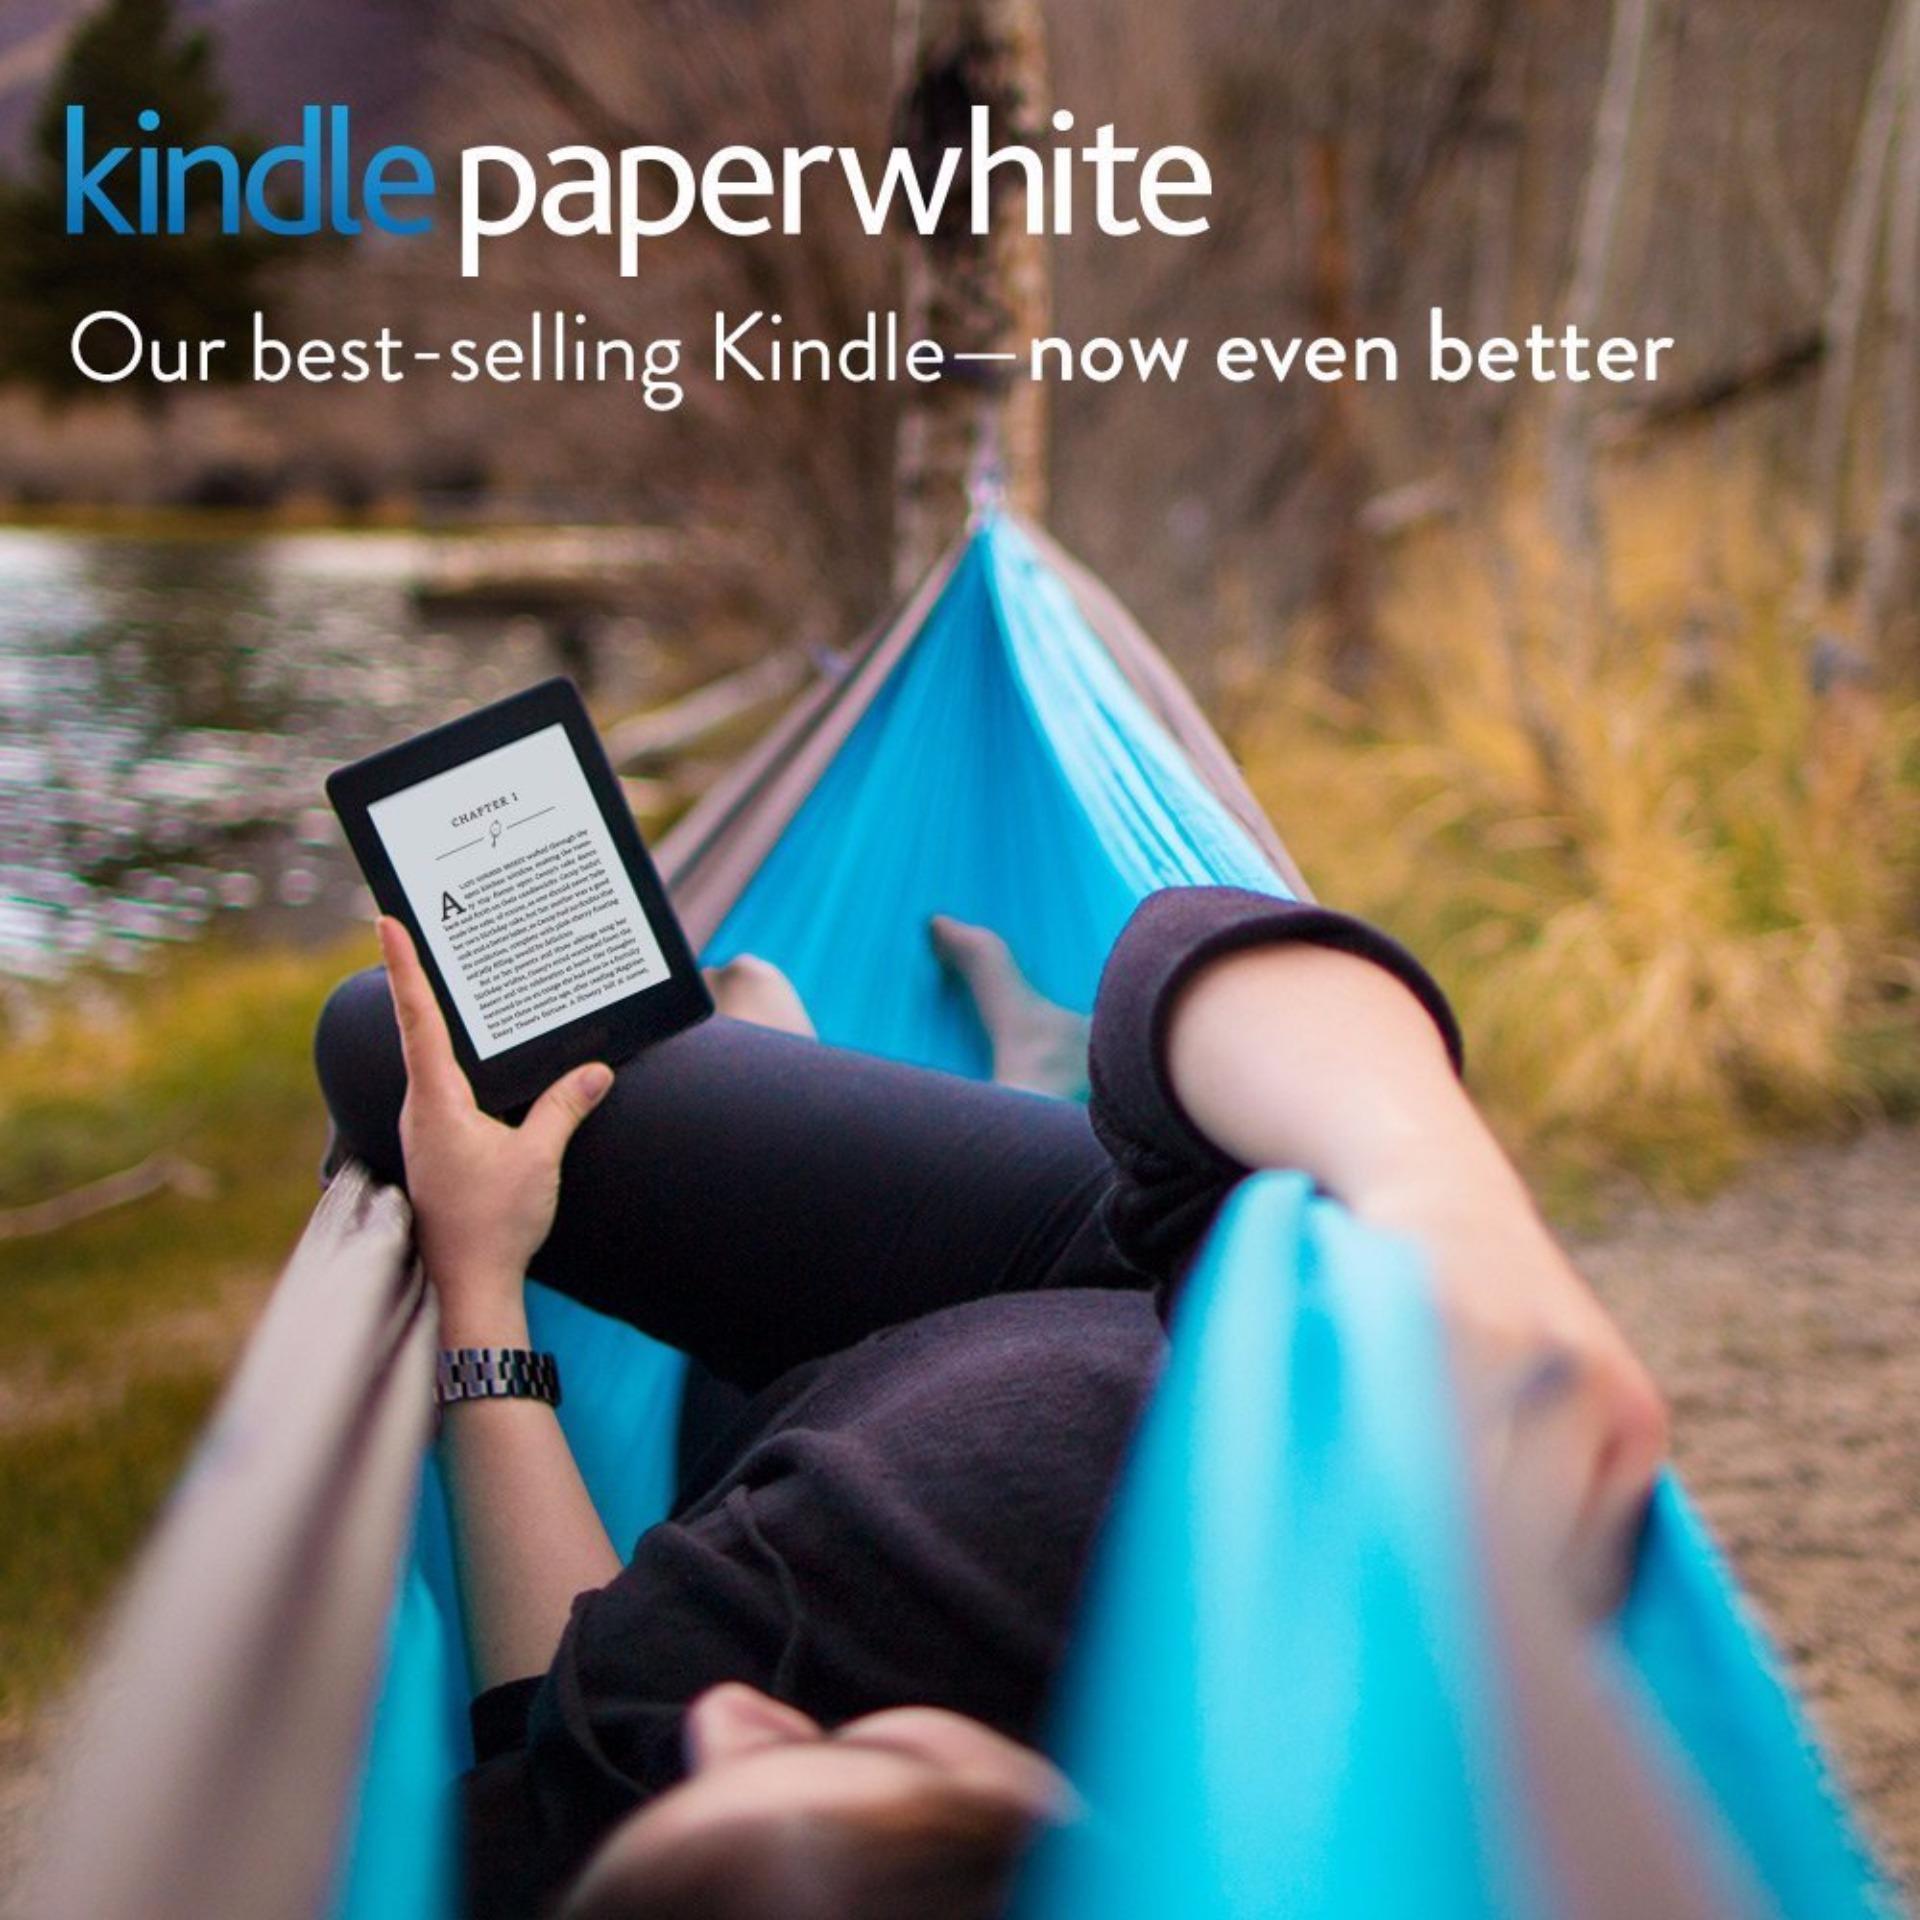 Amazon Kindle Paperwhite 3 (300PPI, White 2016) + 1 x Glossy, 1 x Matt Screen Protector (with Special Offers)